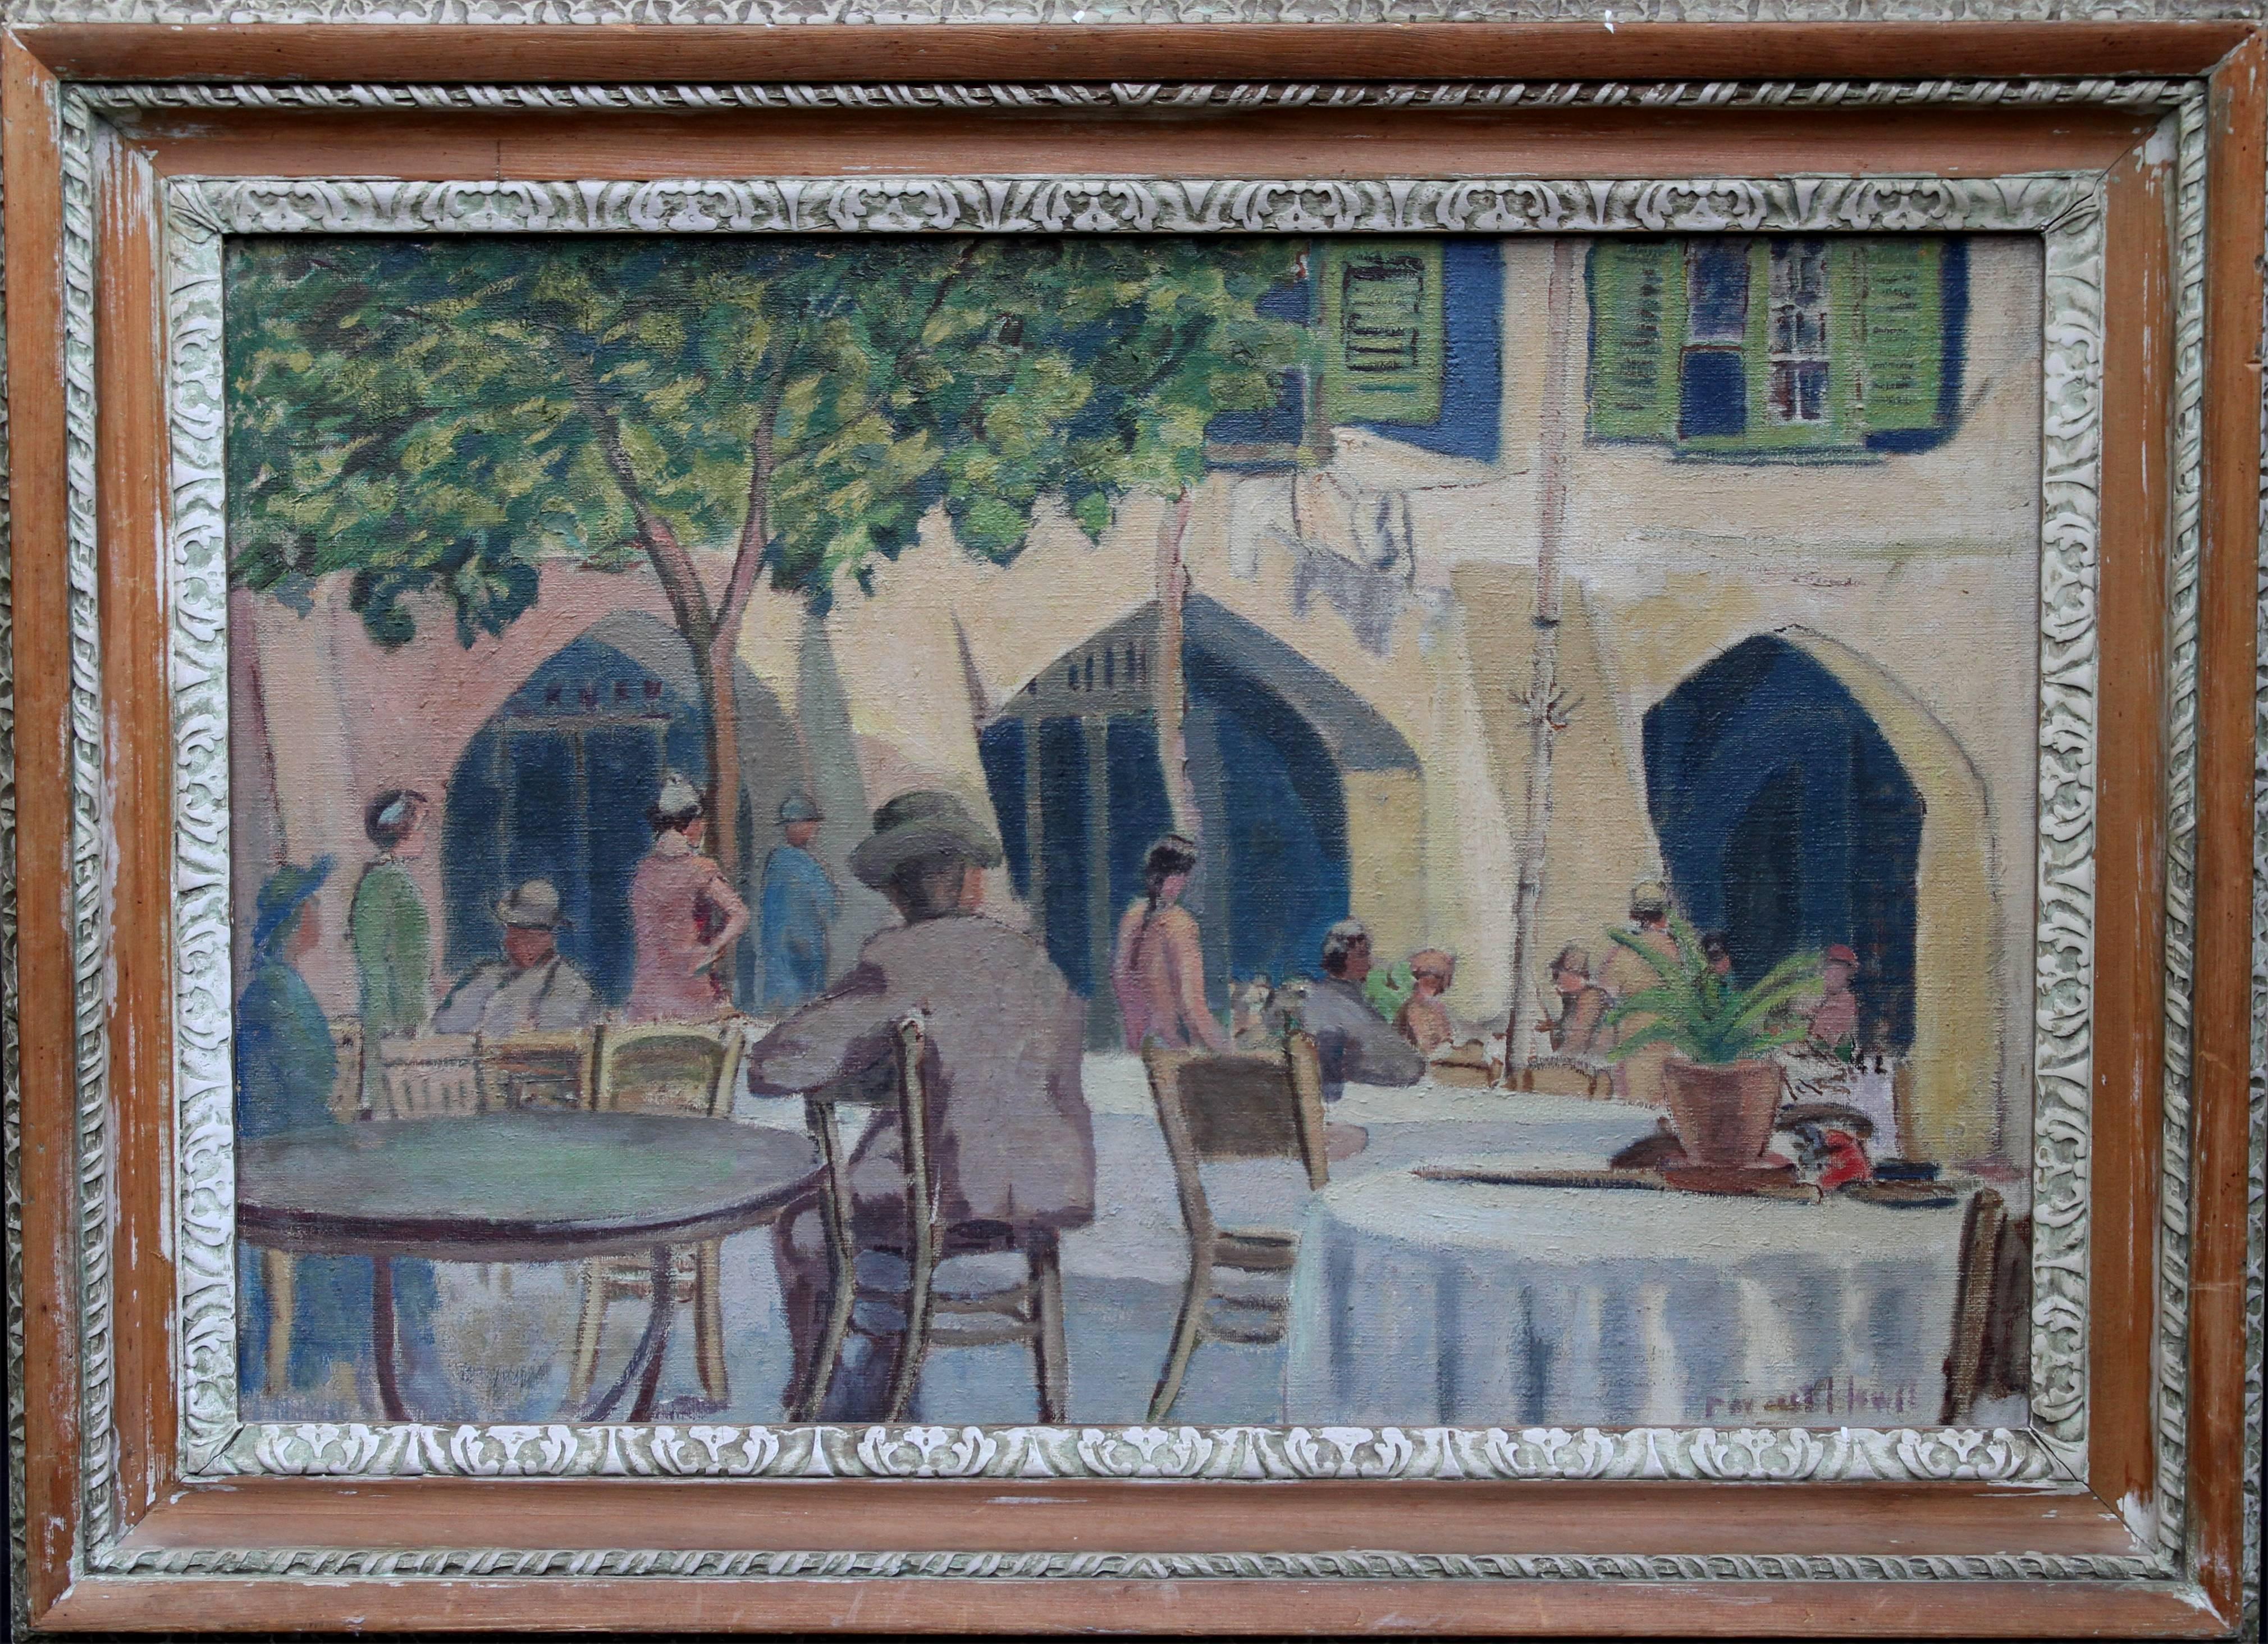 Forrest Hewit Figurative Painting - Cafe Porto Fino Italy - British Post Impressionist oil painting Italian Riviera